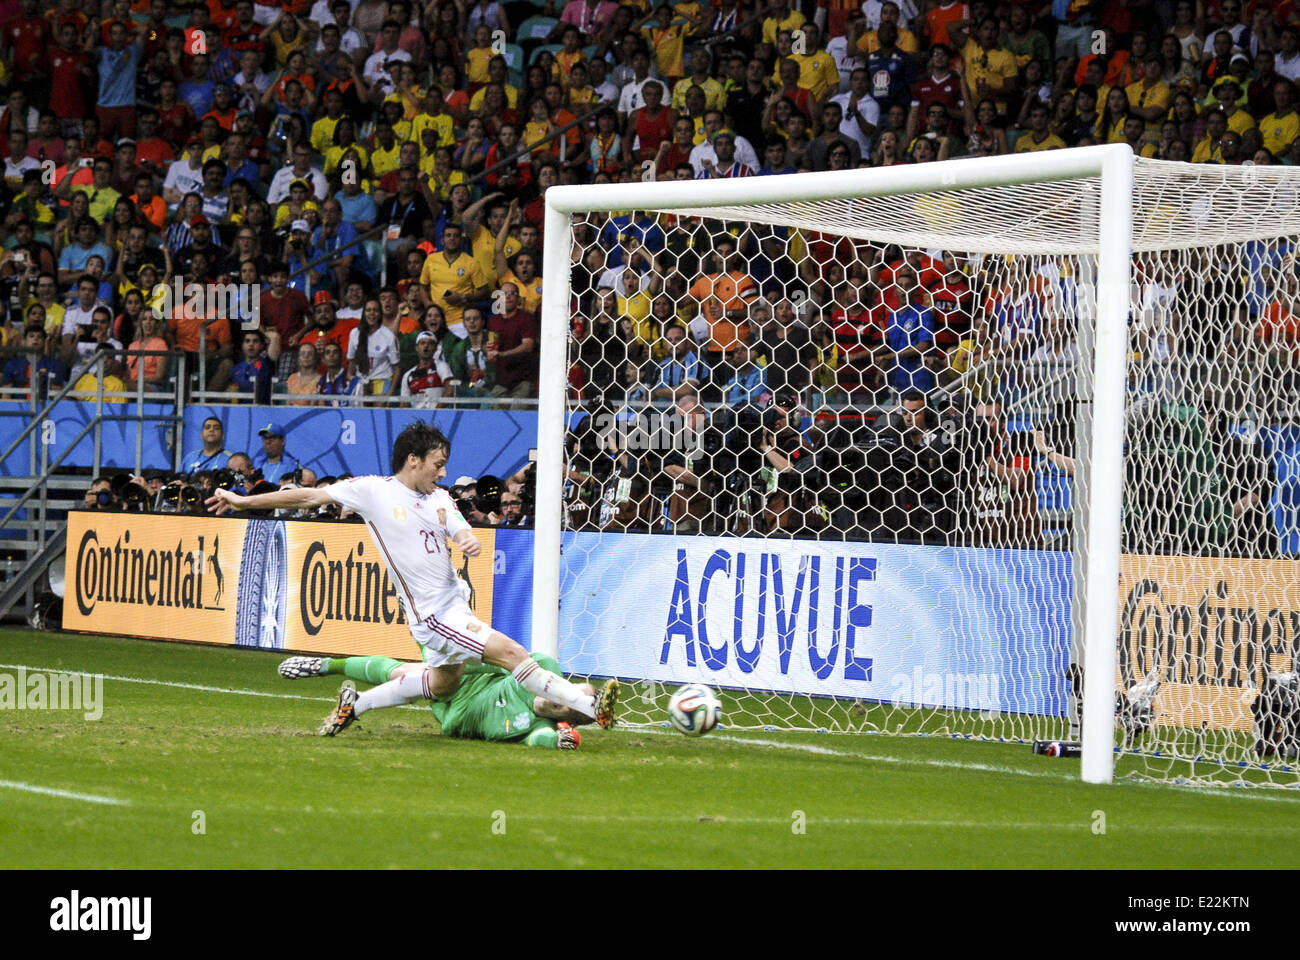 Salvador, Brazil. 13th June, 2014. Spain's #21 David Silva scores a non-valid goal, at the #3 2014 World Cup match between Spain and Netherlands, in Salvador, Brasil, this friday 13th Credit:  Gustavo Basso/NurPhoto/ZUMAPRESS.com/Alamy Live News Stock Photo